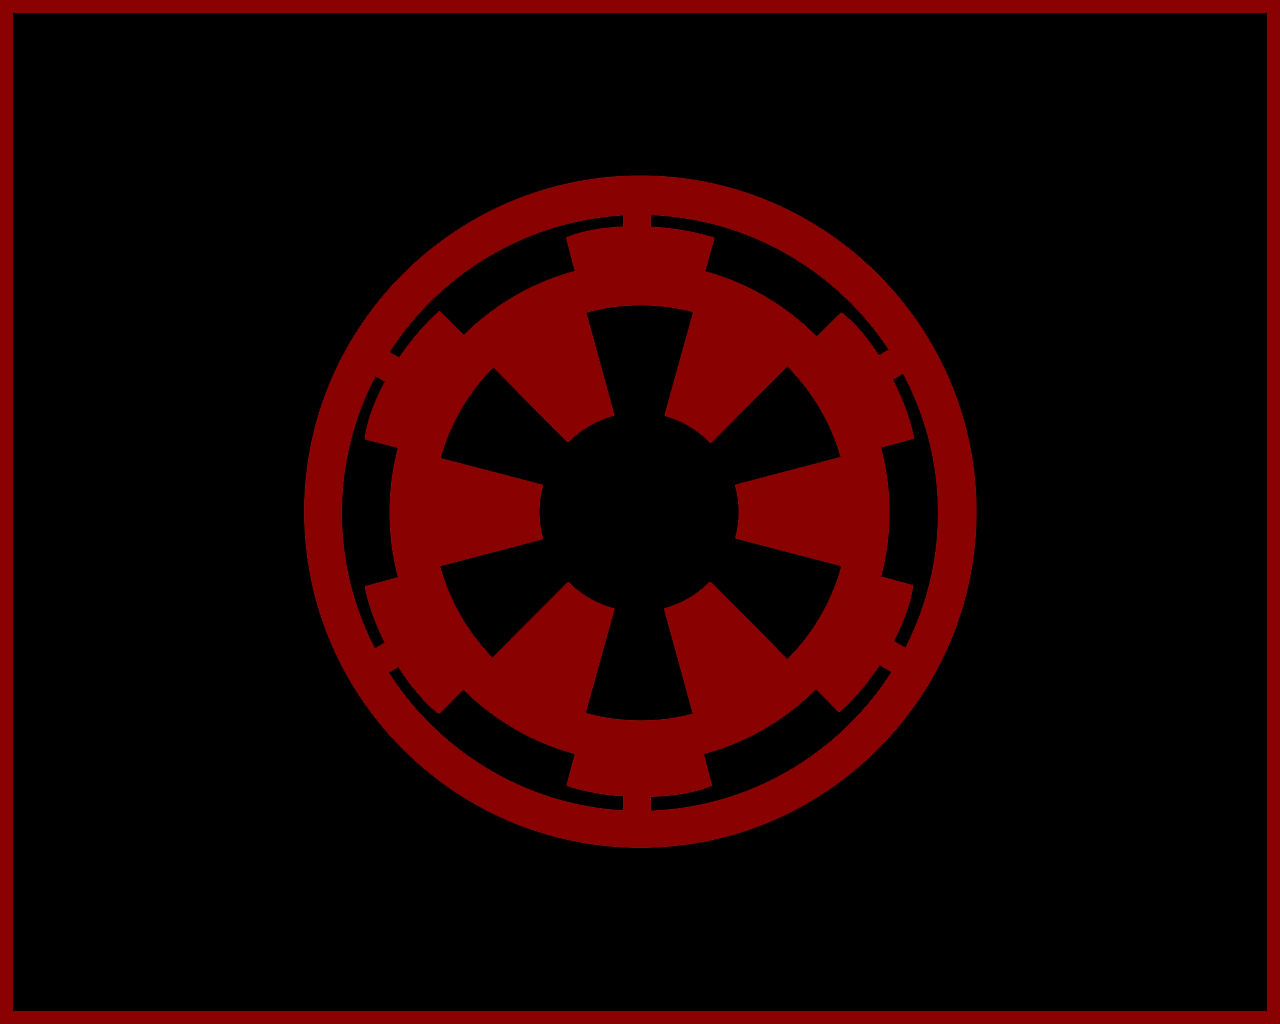 Star Wars Empire Logo Wallpapers Top Free Star Wars Empire Logo Backgrounds Wallpaperaccess